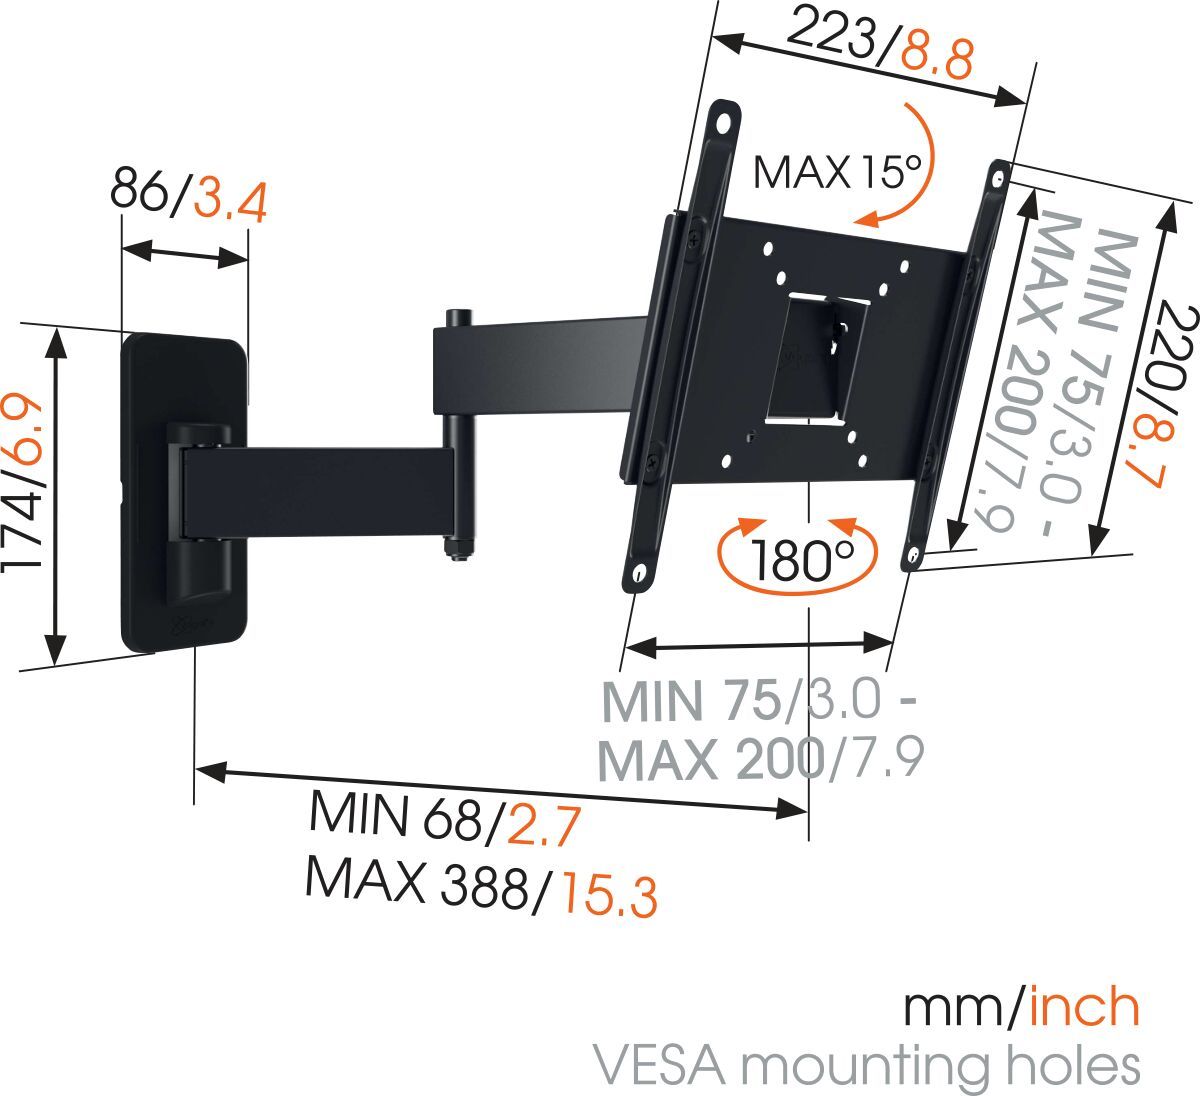 Vogel's MA 2040 Full-Motion TV Wall Mount - Suitable for 19 up to 43 inch TVs - Full motion (up to 180°) - Tilt up to 10° - Dimensions